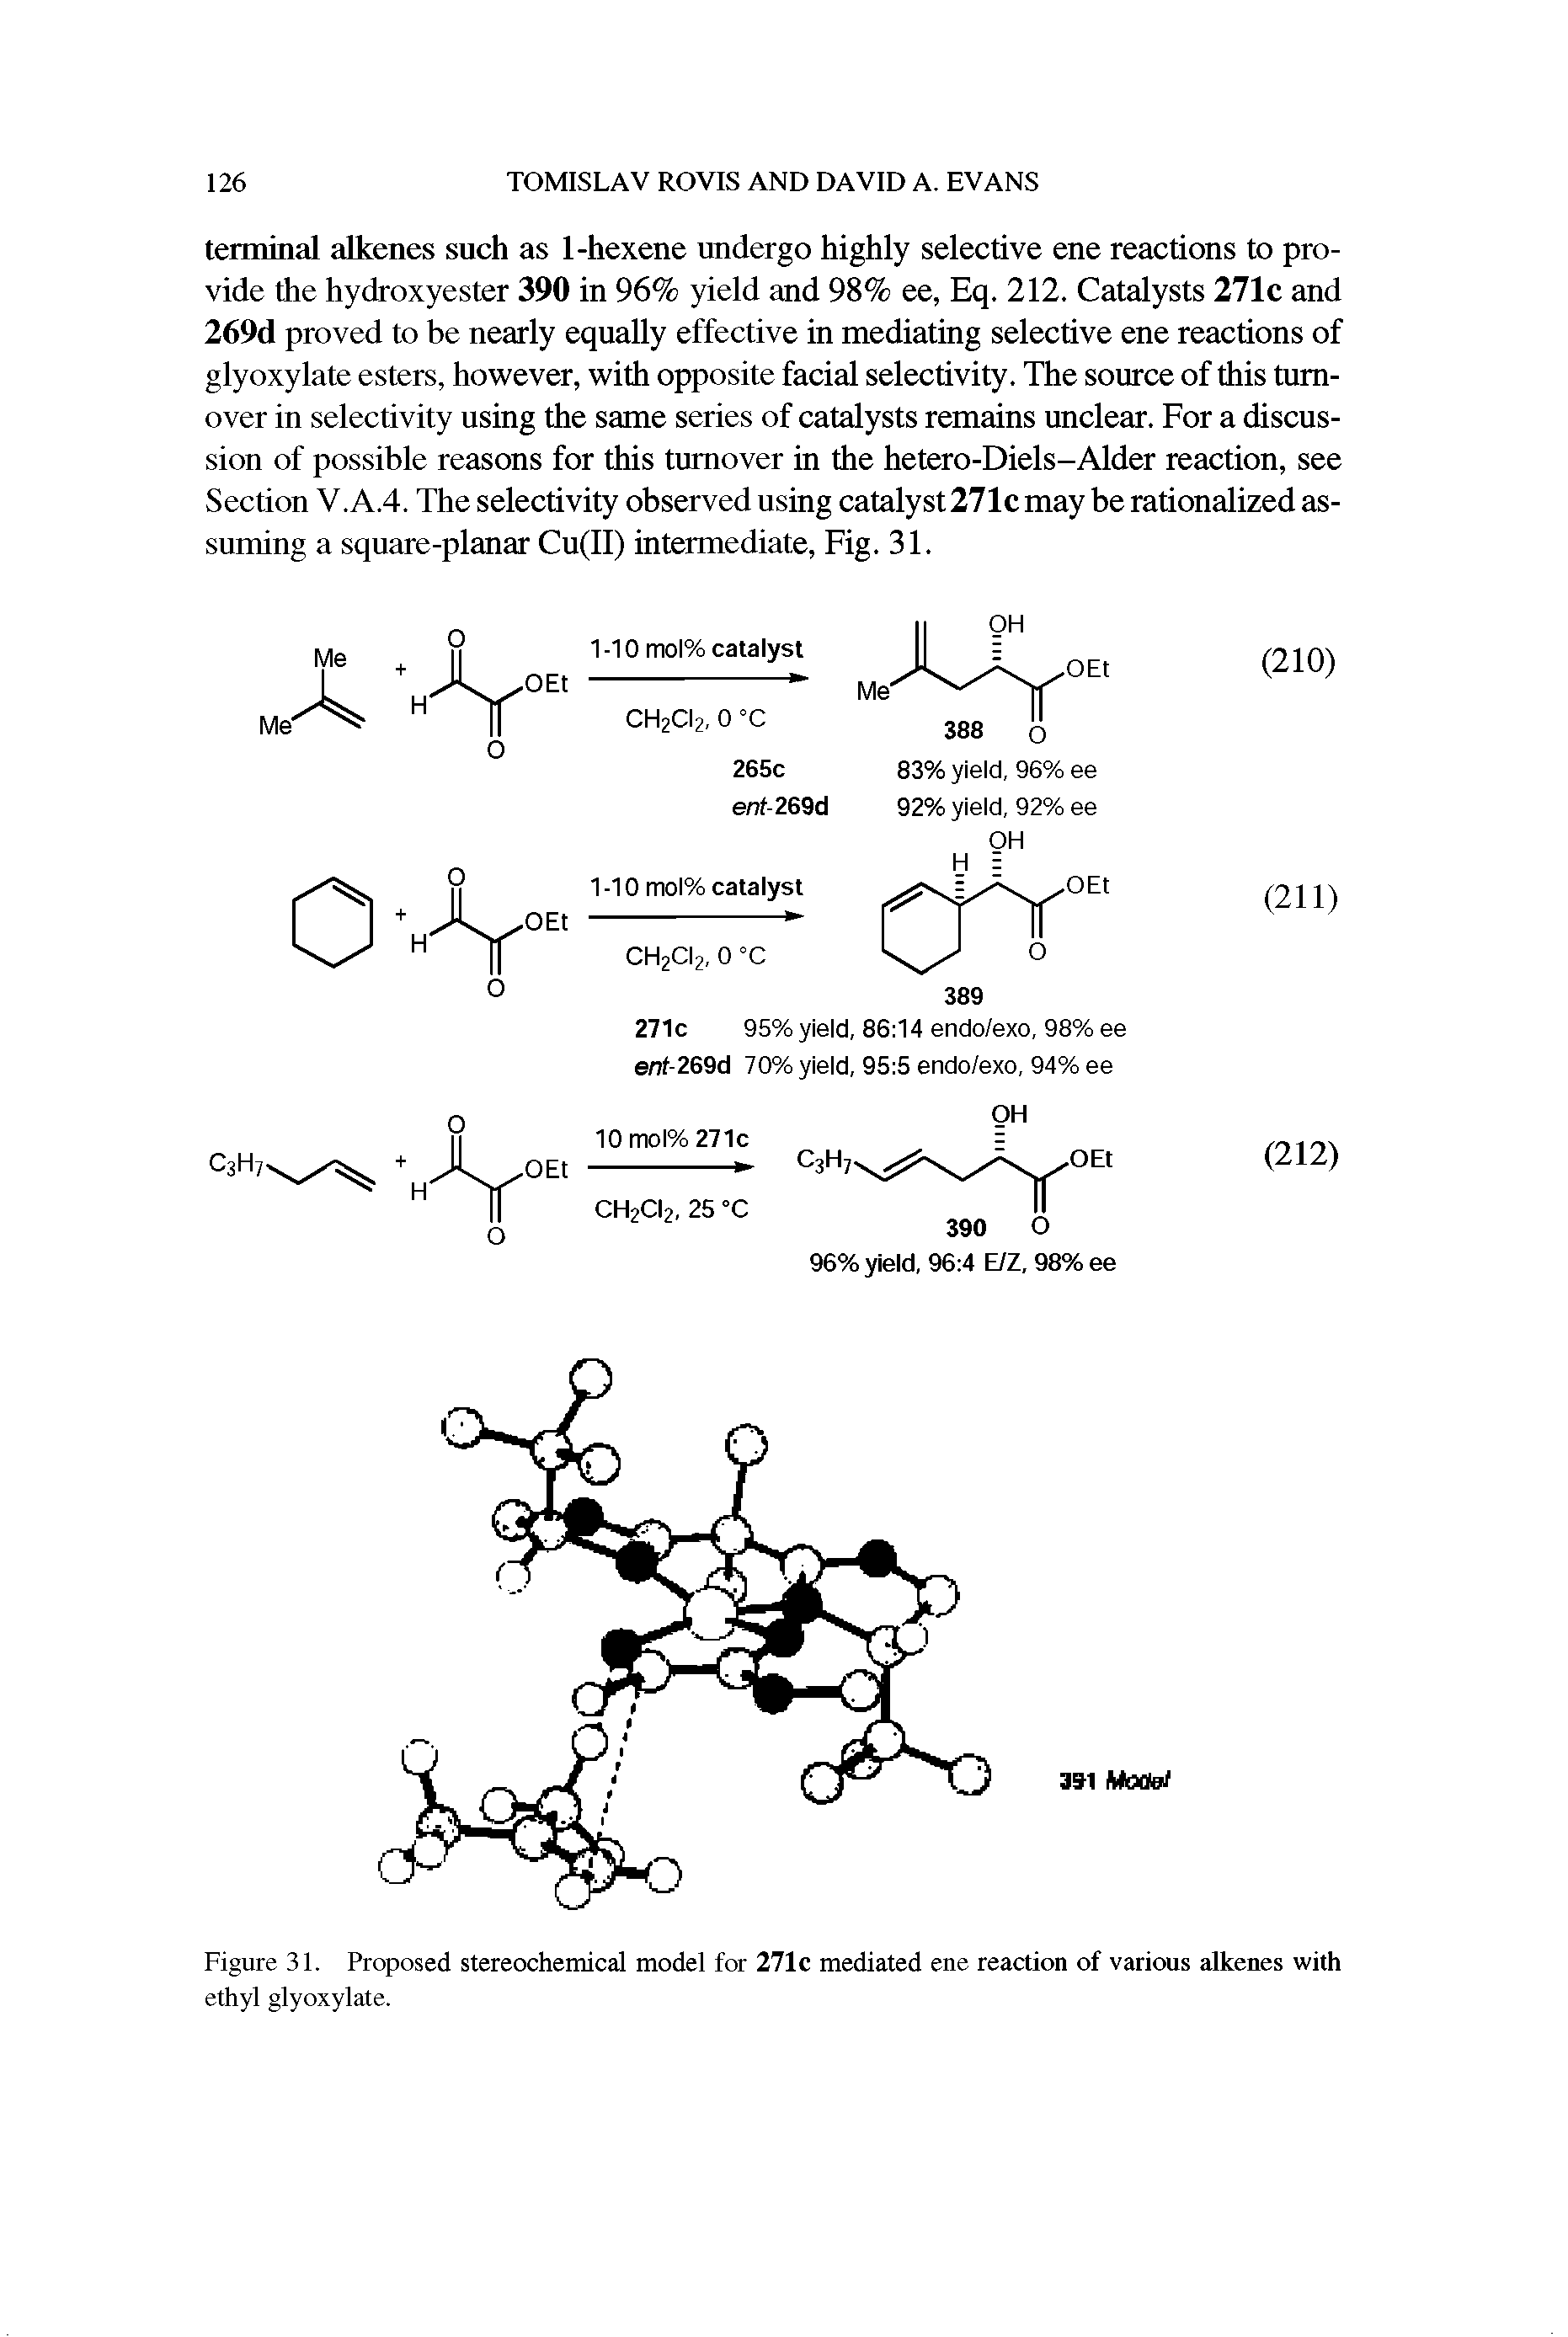 Figure 31. Proposed stereochemical model for 271c mediated ene reaction of various alkenes with ethyl glyoxylate.